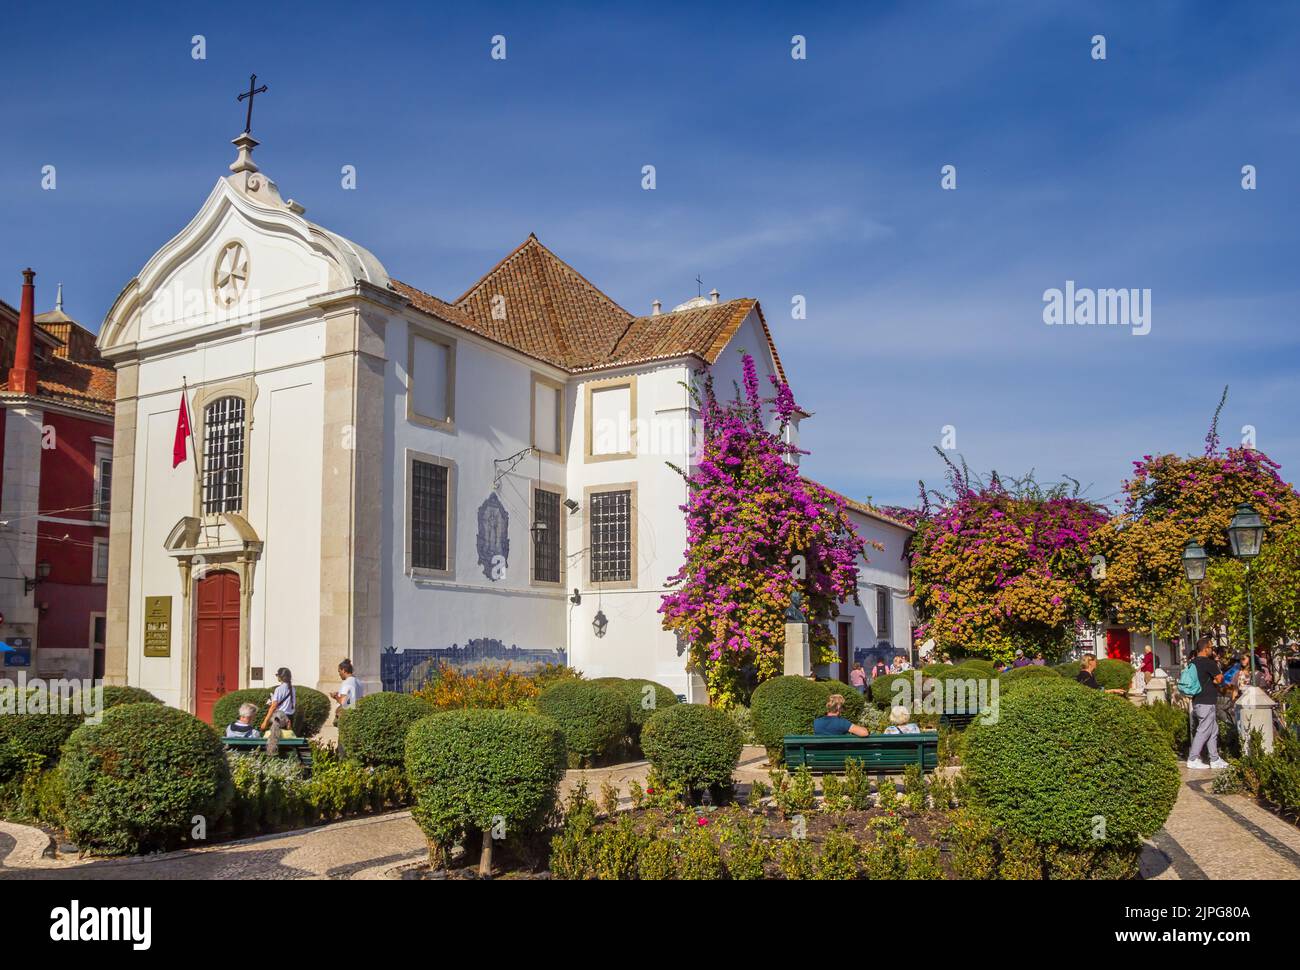 Pink flowers in the garden of the Santa Luzia church in Lisbon, Portugal Stock Photo